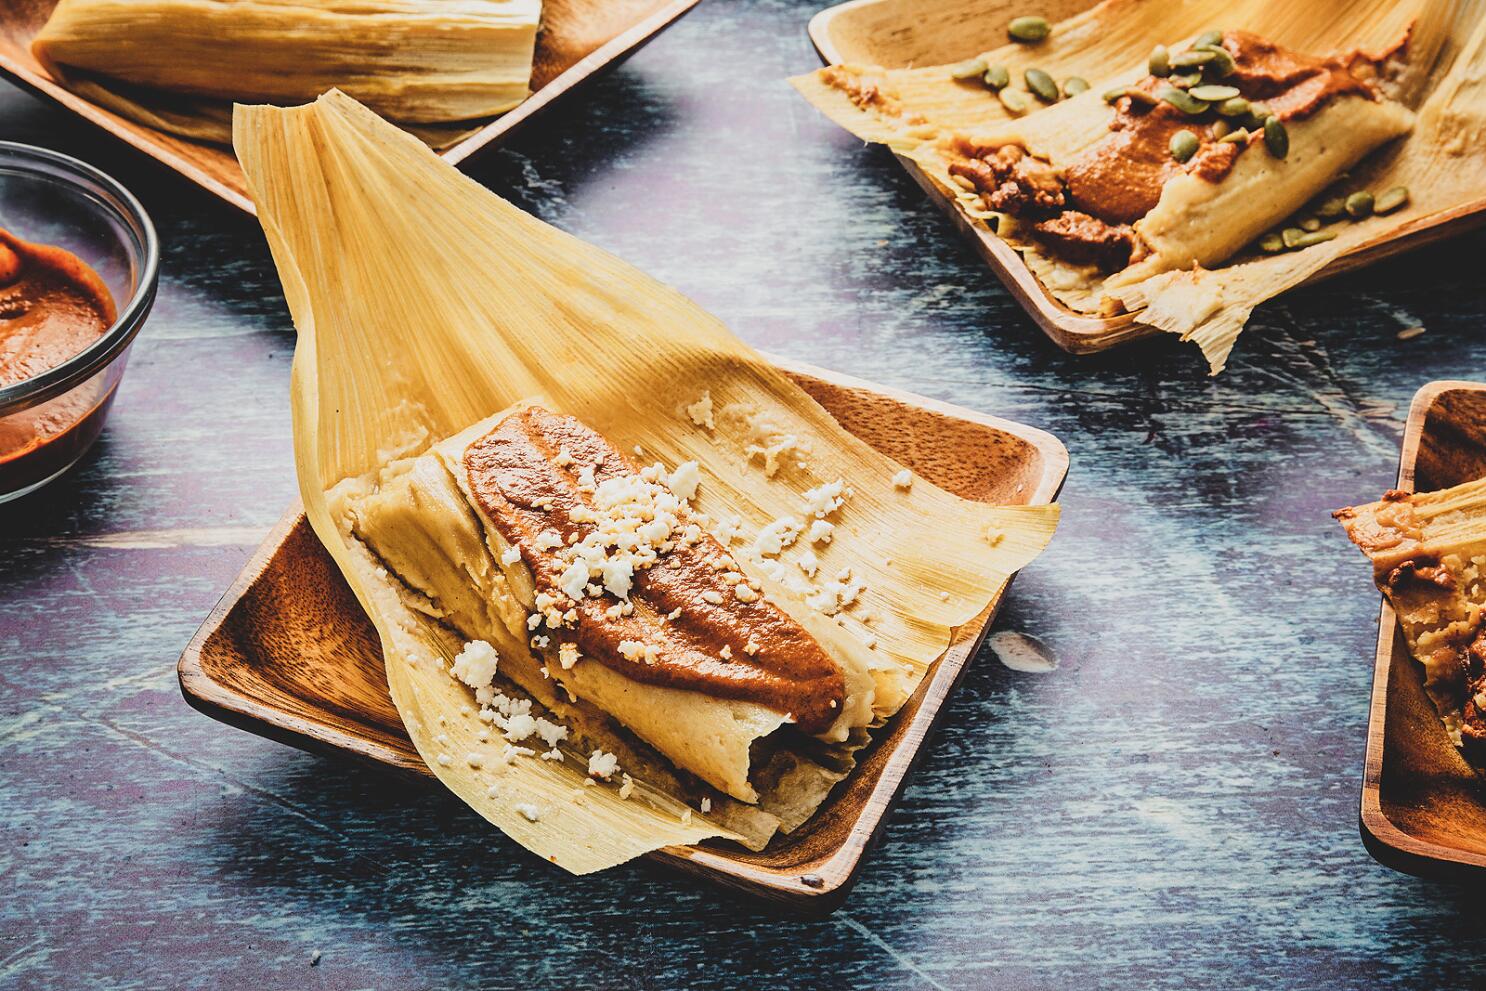 How to Steam Tamales - The Kitchen Community